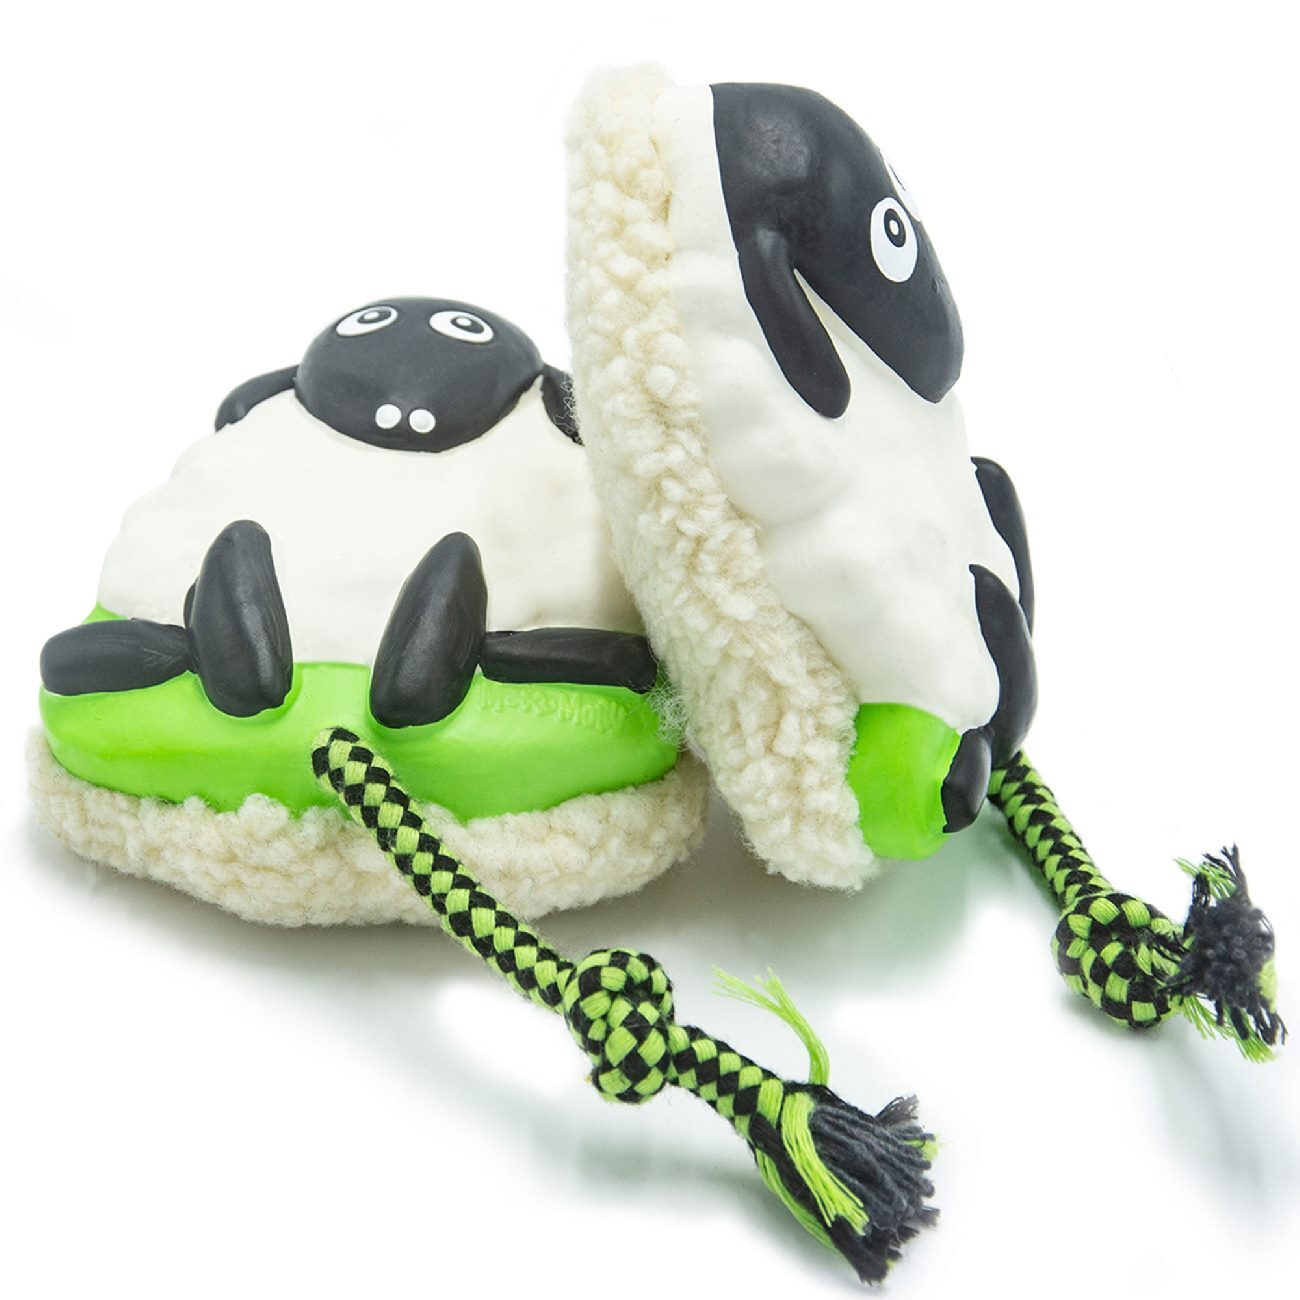 Max & Molly Squeaker Snuggles Dog Toy - Woody the Sheep image 0